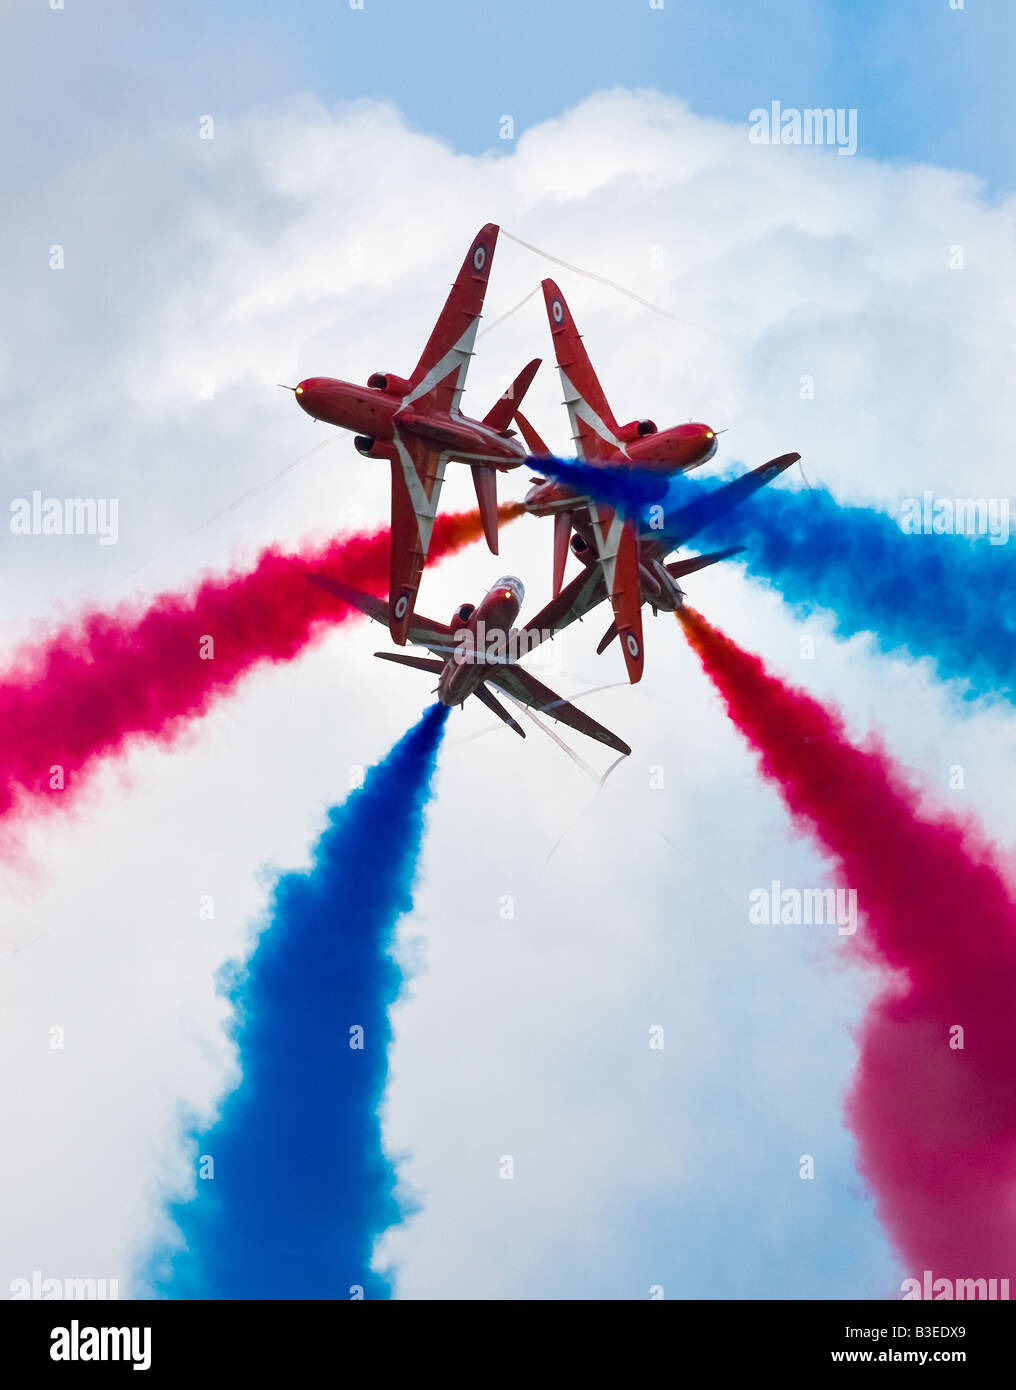 Red arrows cockpit stock images - Alamy